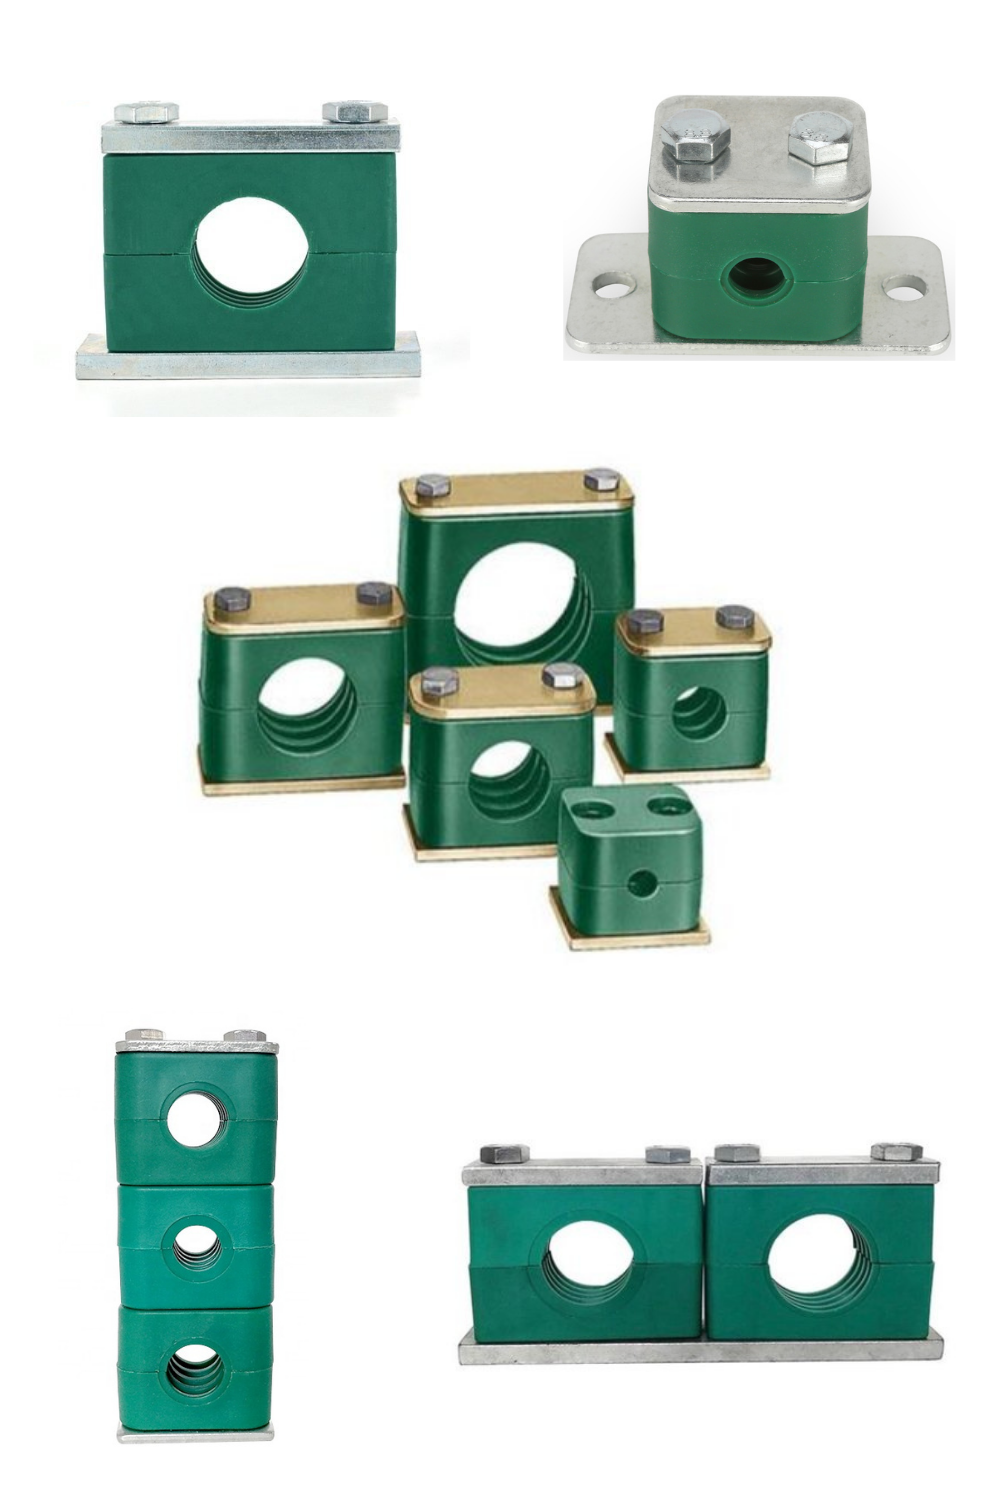 hydraulic pipe clamps